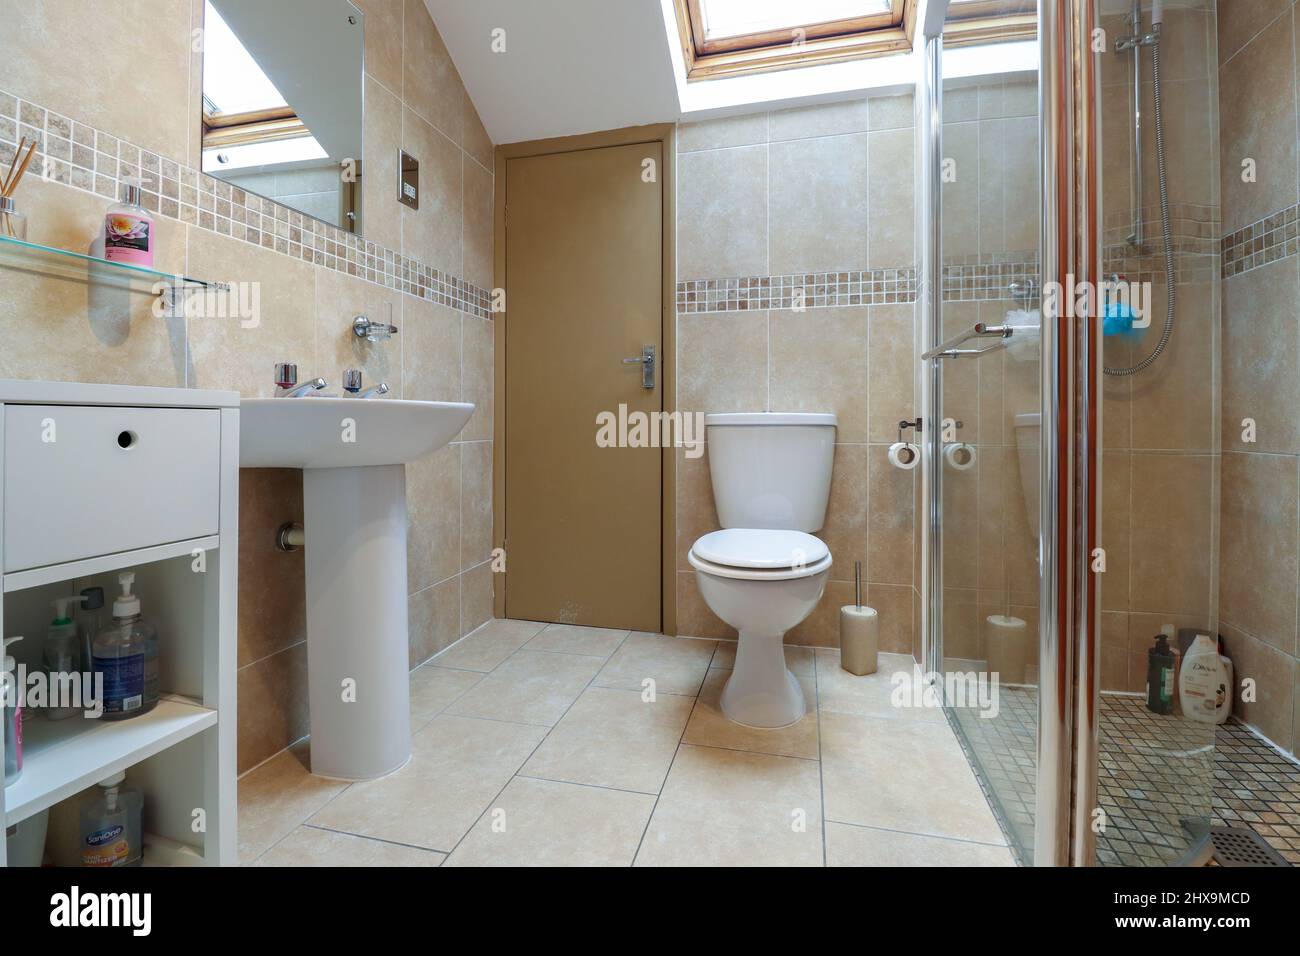 Bathroom in an older house, with walk in shower cubicle Stock Photo